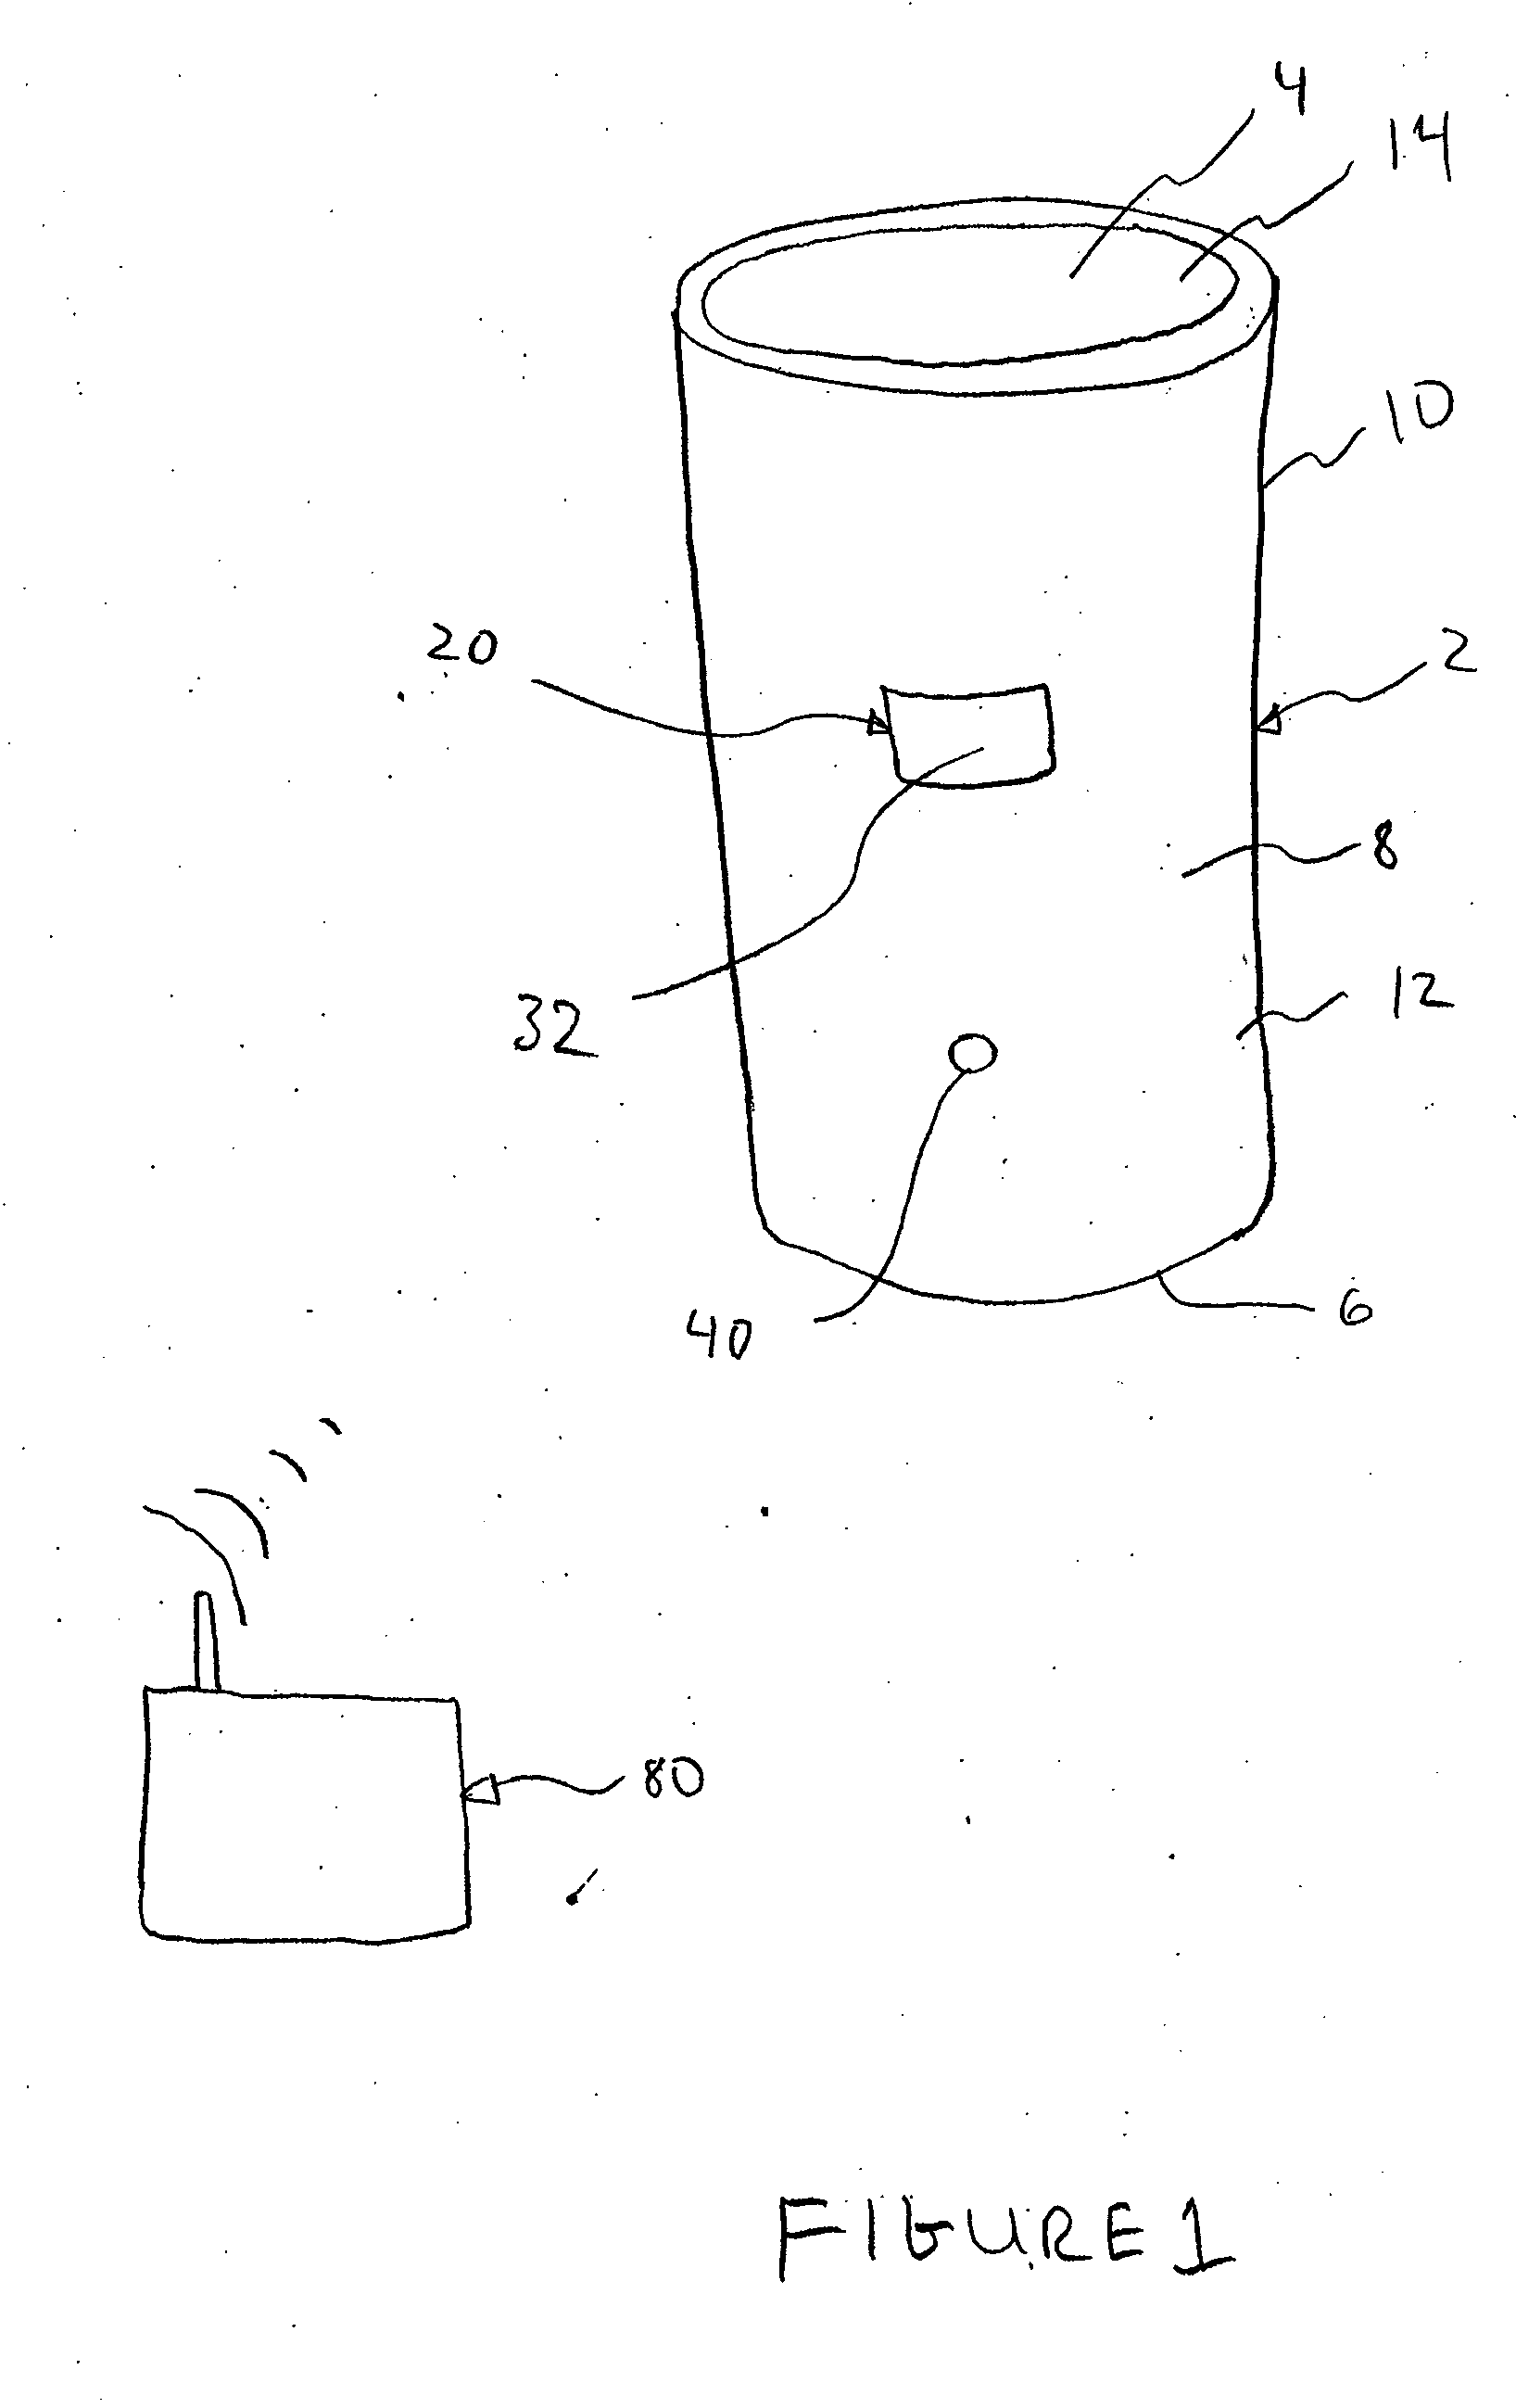 RF device in drinkware to record data/initiate sequence of behavior